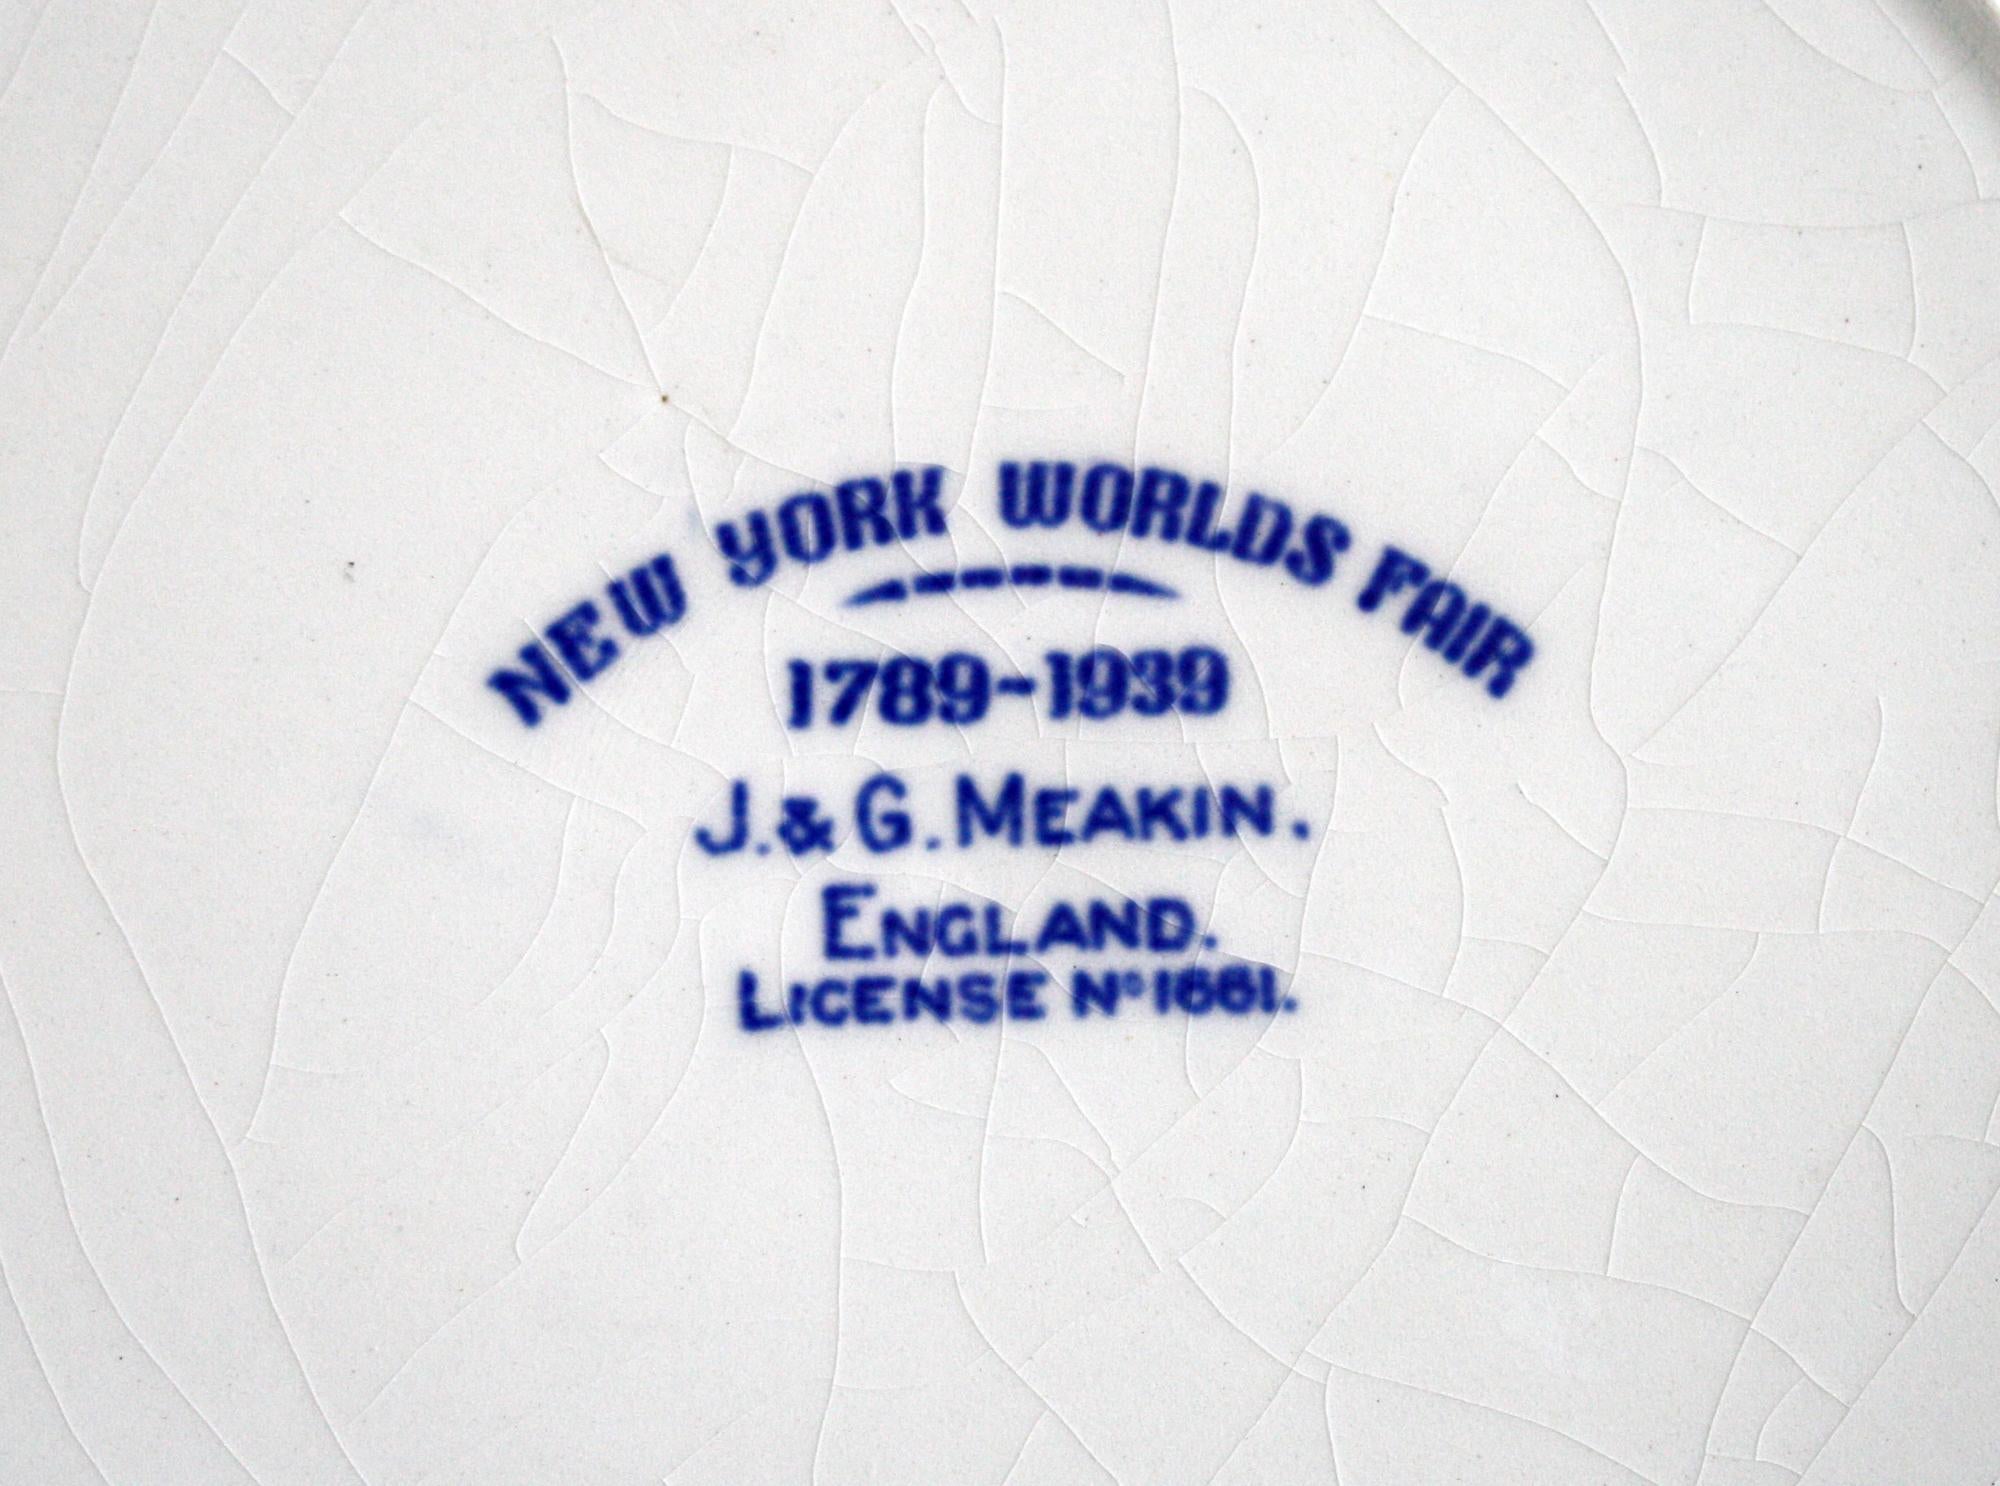 J & G Meakin New York Worlds Fair Commemorative Pottery Plate, 1939 1